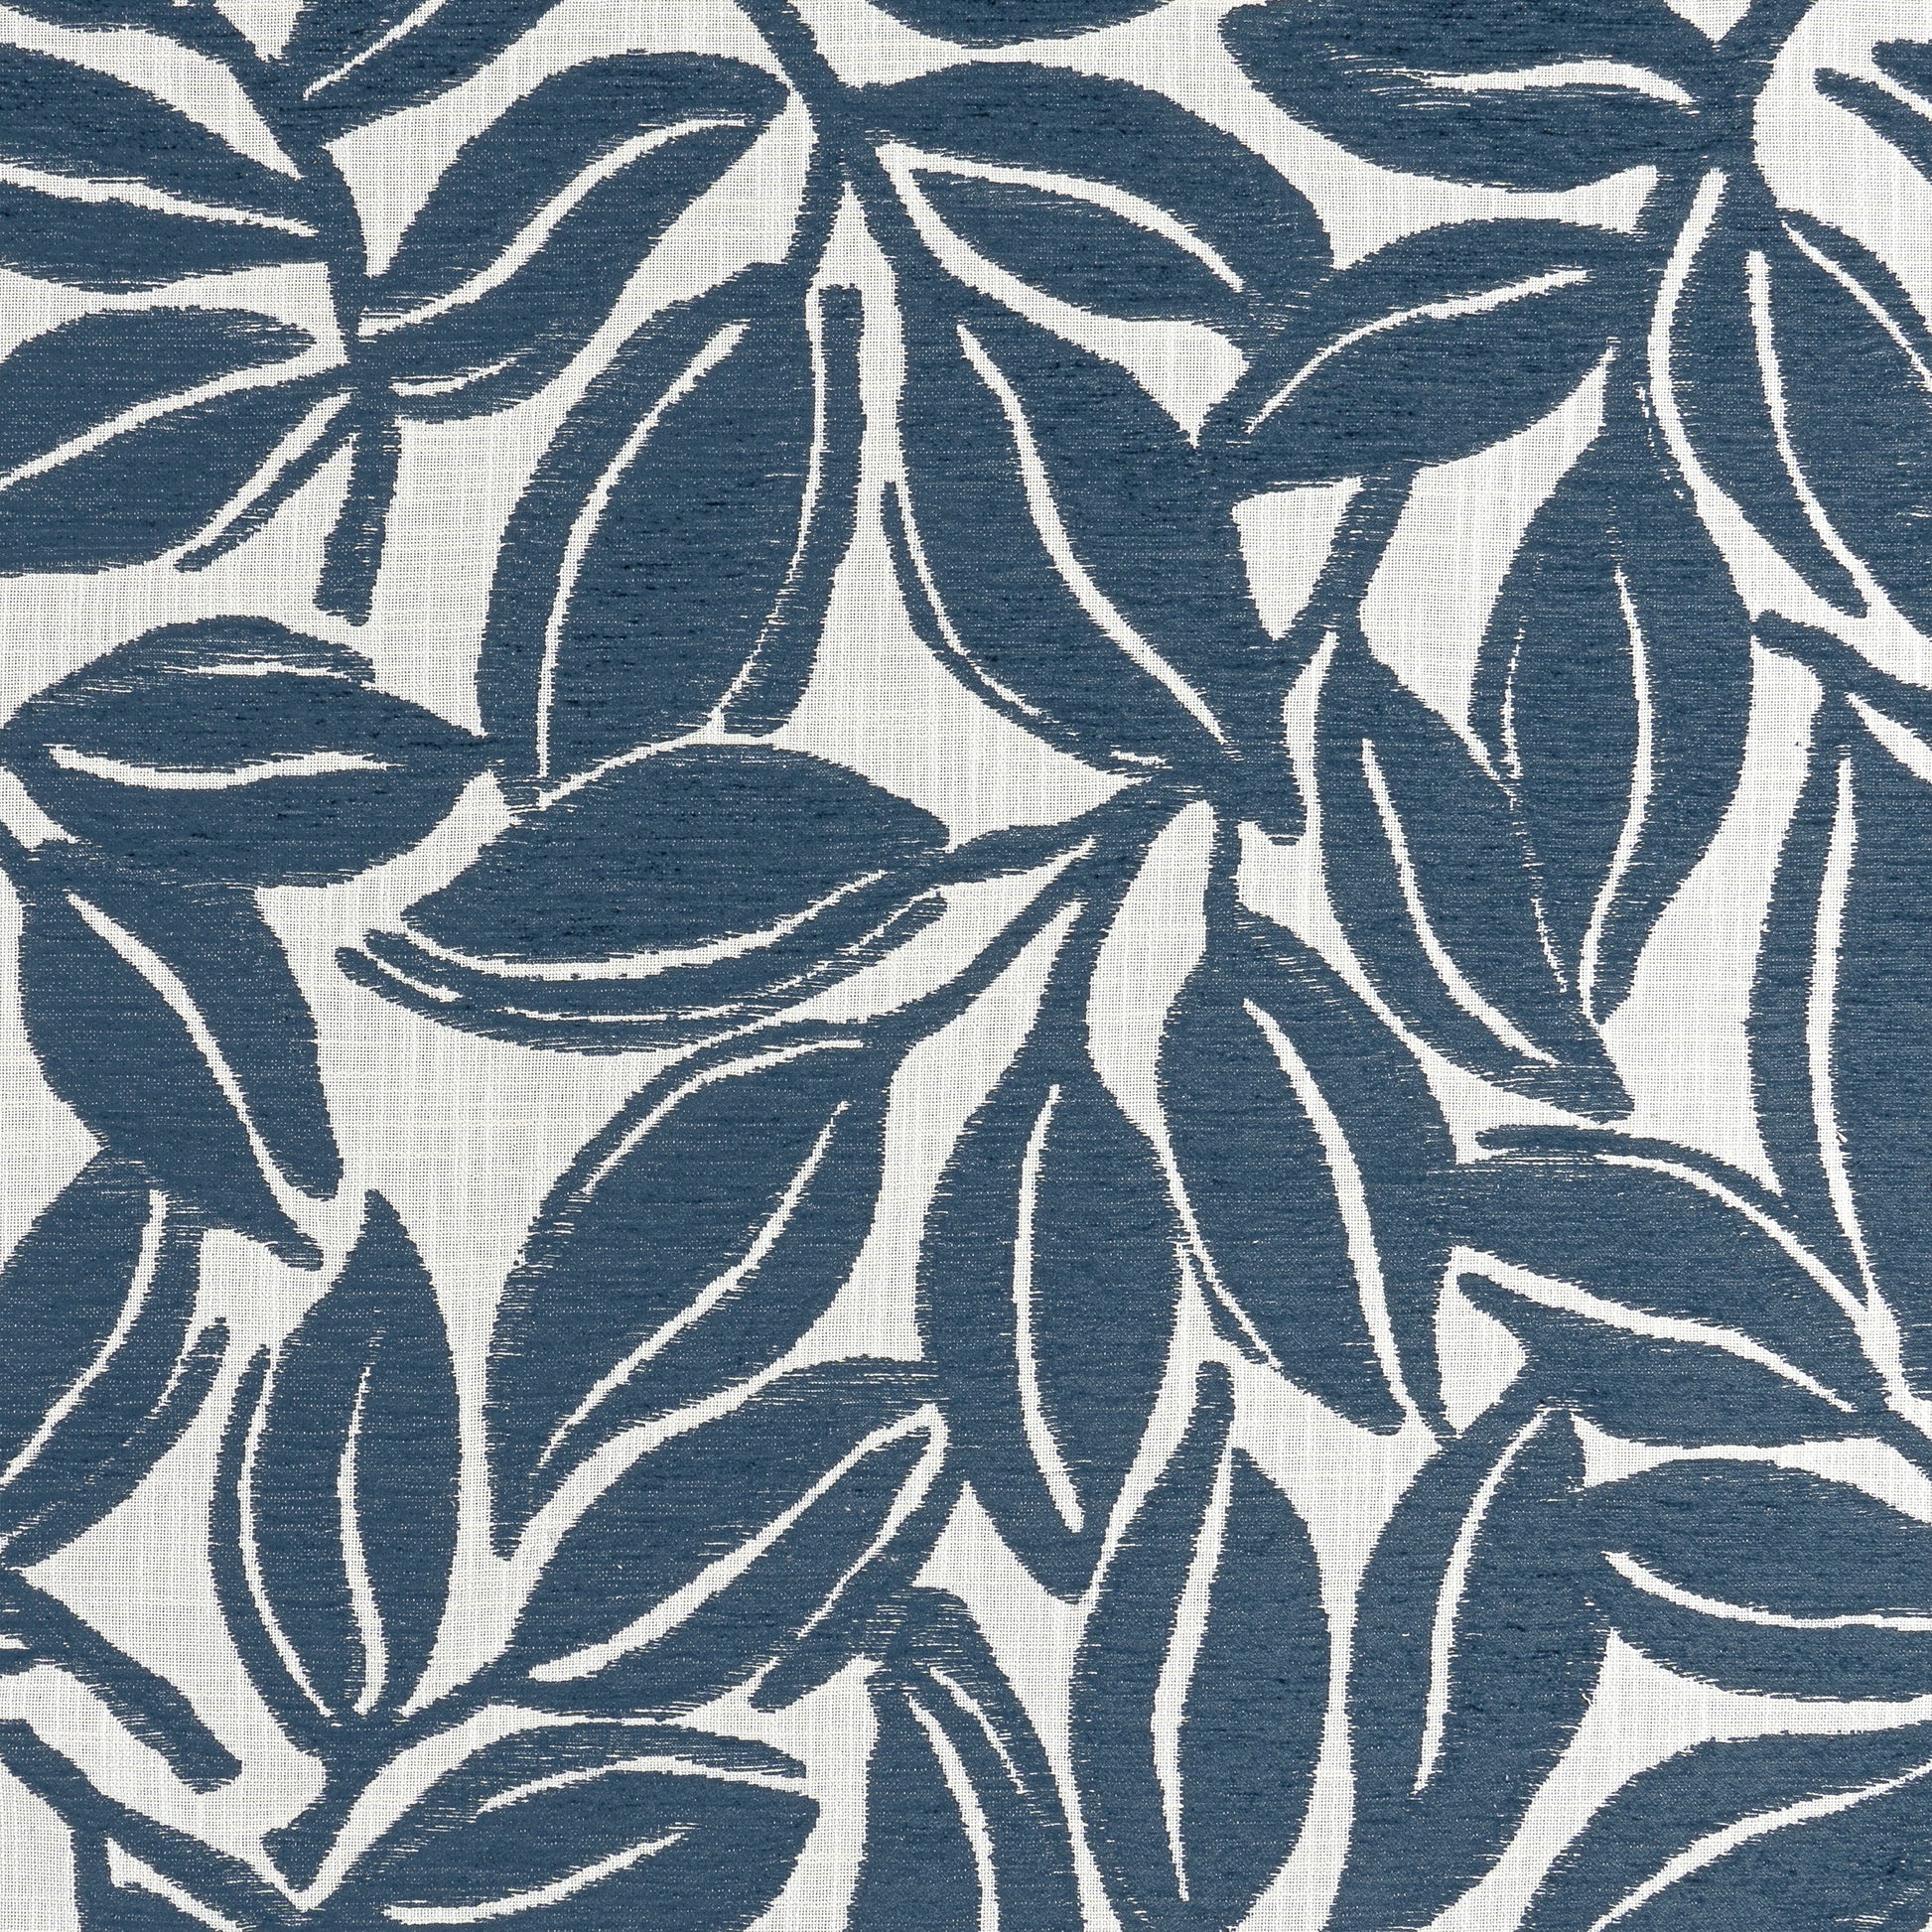 Purchase Thibaut Fabric Product# W8813 pattern name Kona color Navy